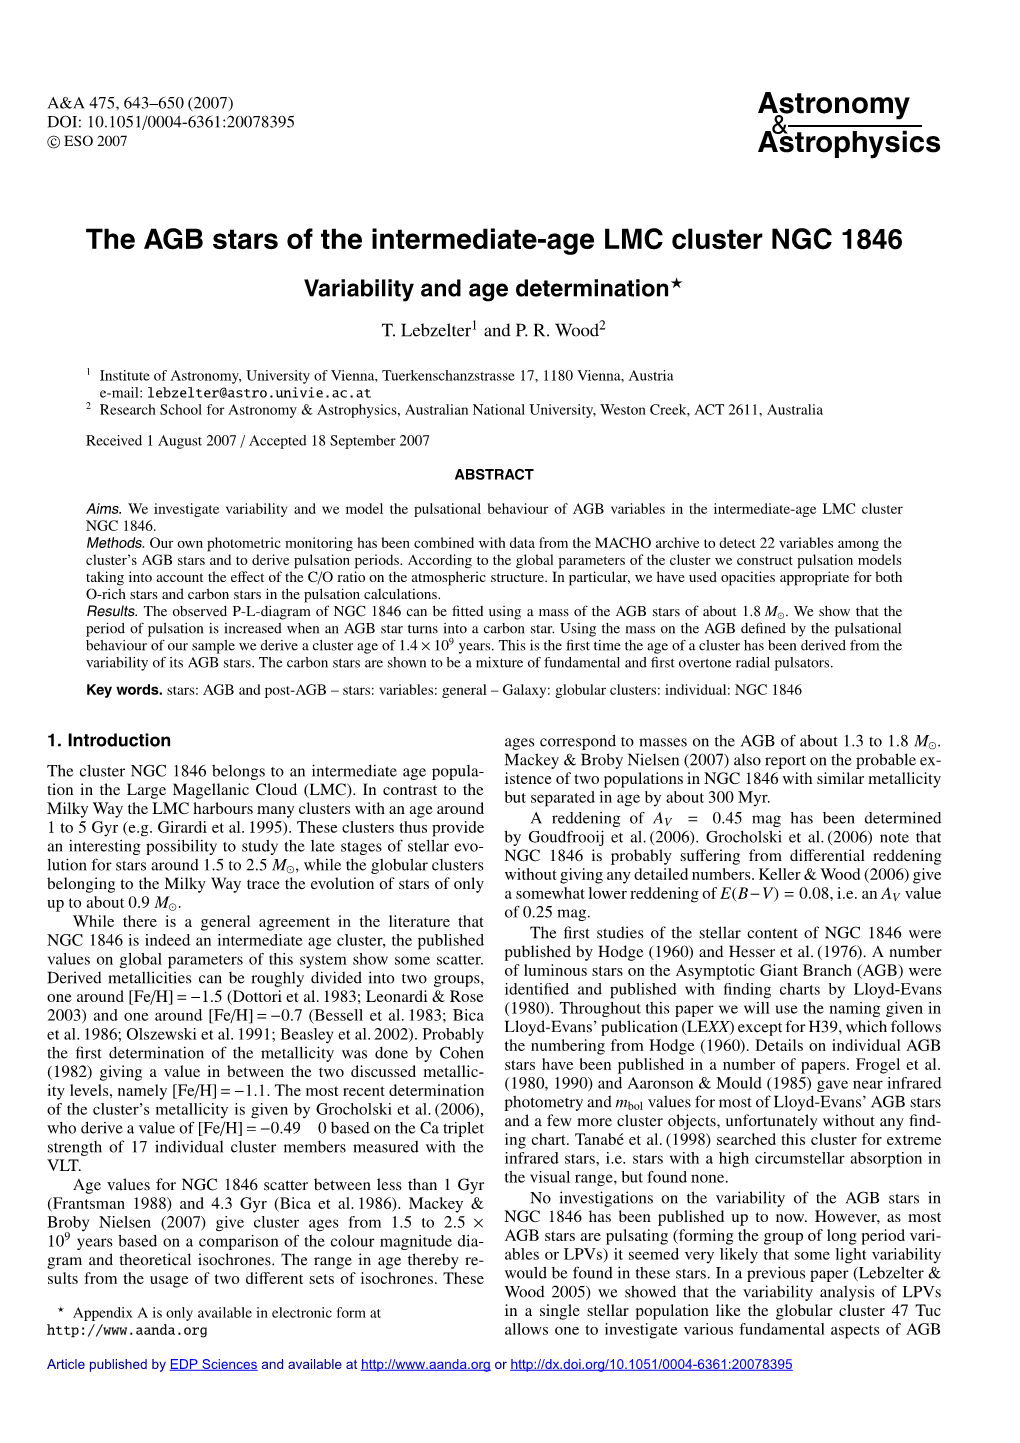 The AGB Stars of the Intermediate-Age LMC Cluster NGC 1846 Variability and Age Determination